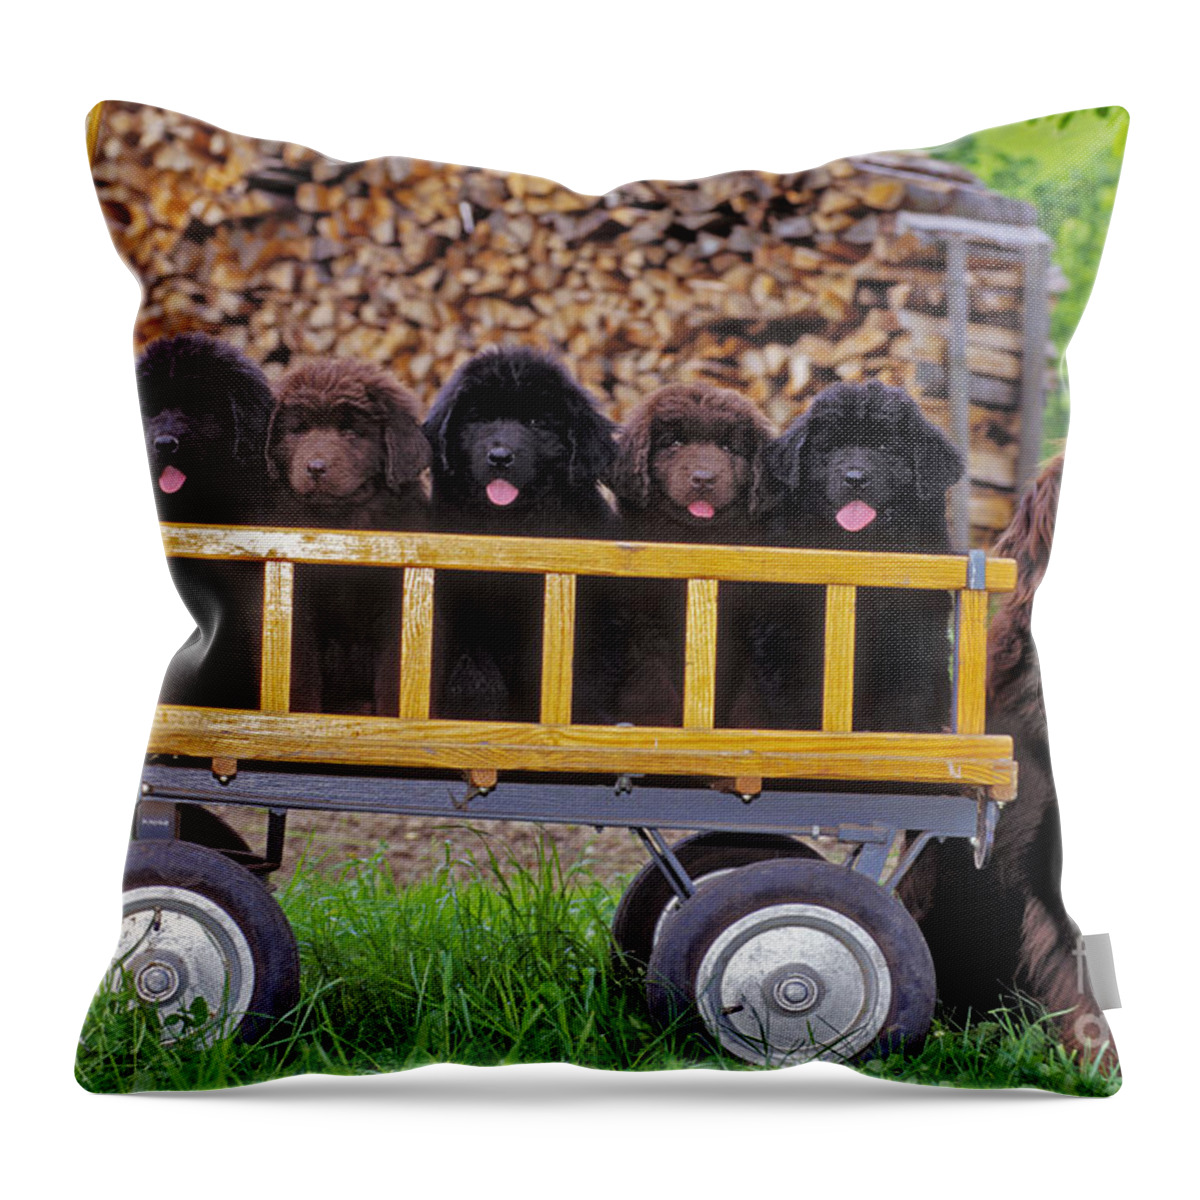 Newfoundland Throw Pillow featuring the photograph Newfoundland With Puppies by Rolf Kopfle